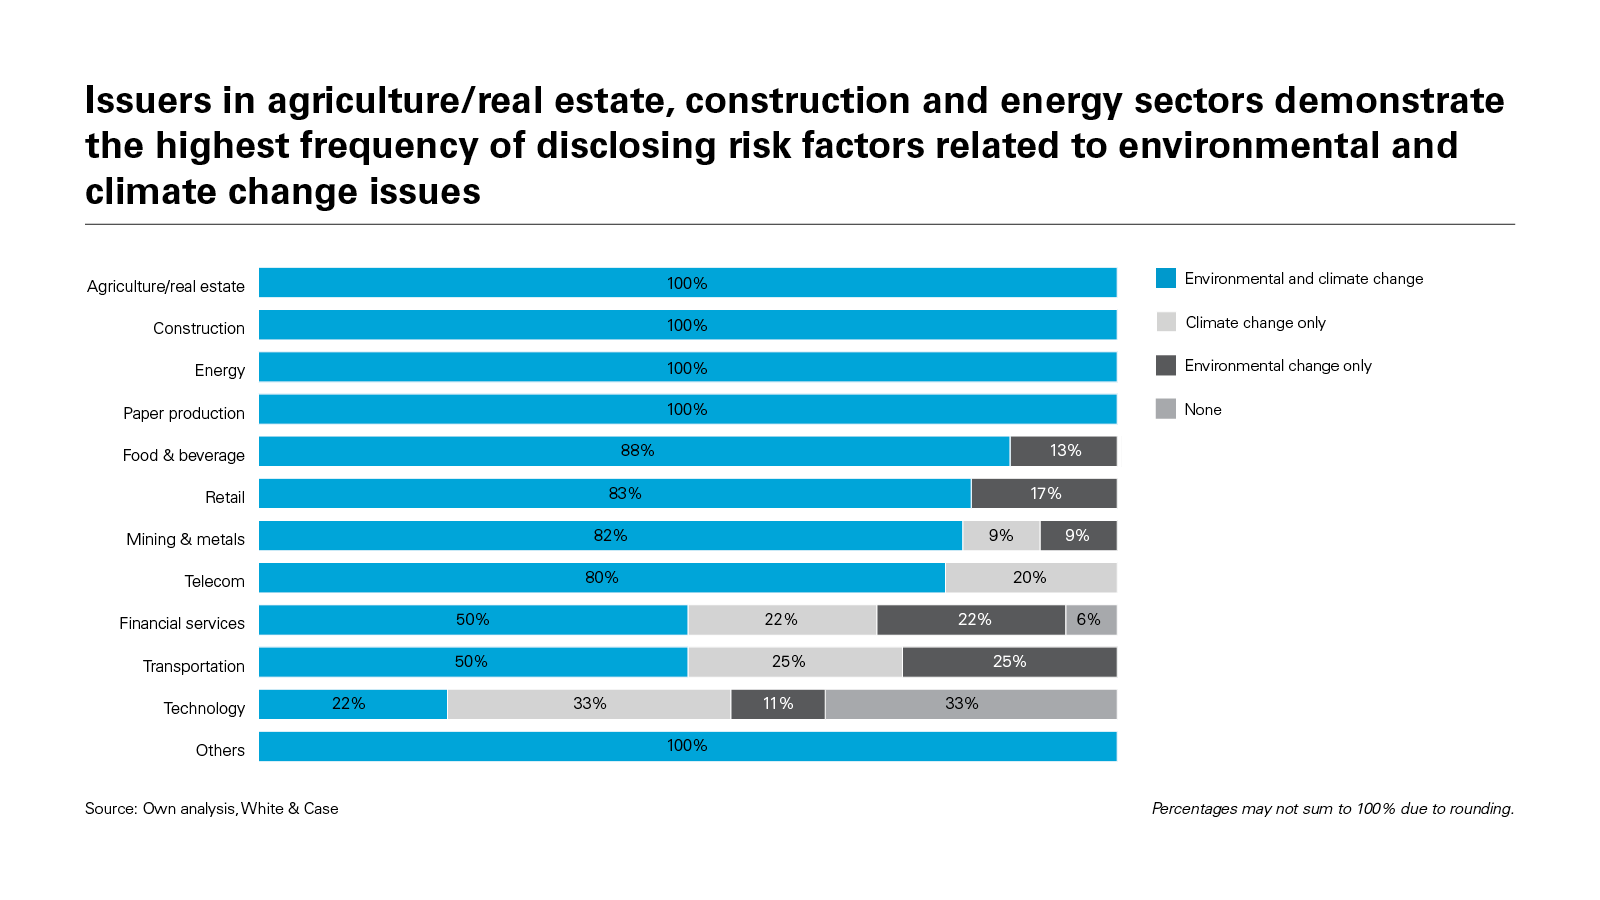 Issuers in agriculture/real estate, construction and energy sectors demonstrate the highest frequency of disclosing risk factors